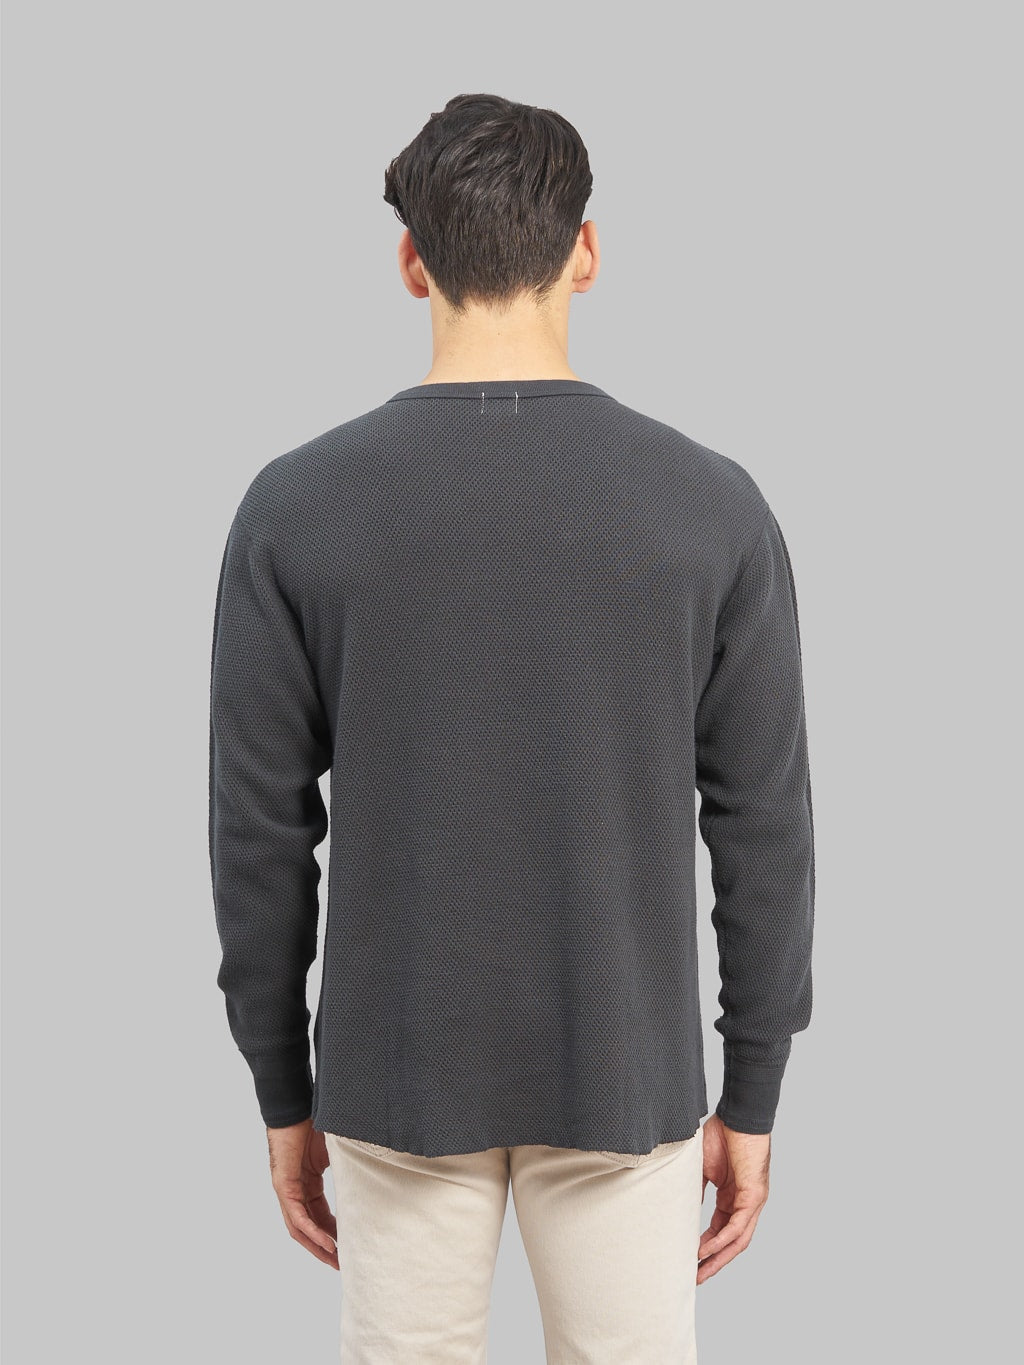 Loop & Weft Double Face Hex Honeycomb Crewneck Thermal Antique Black